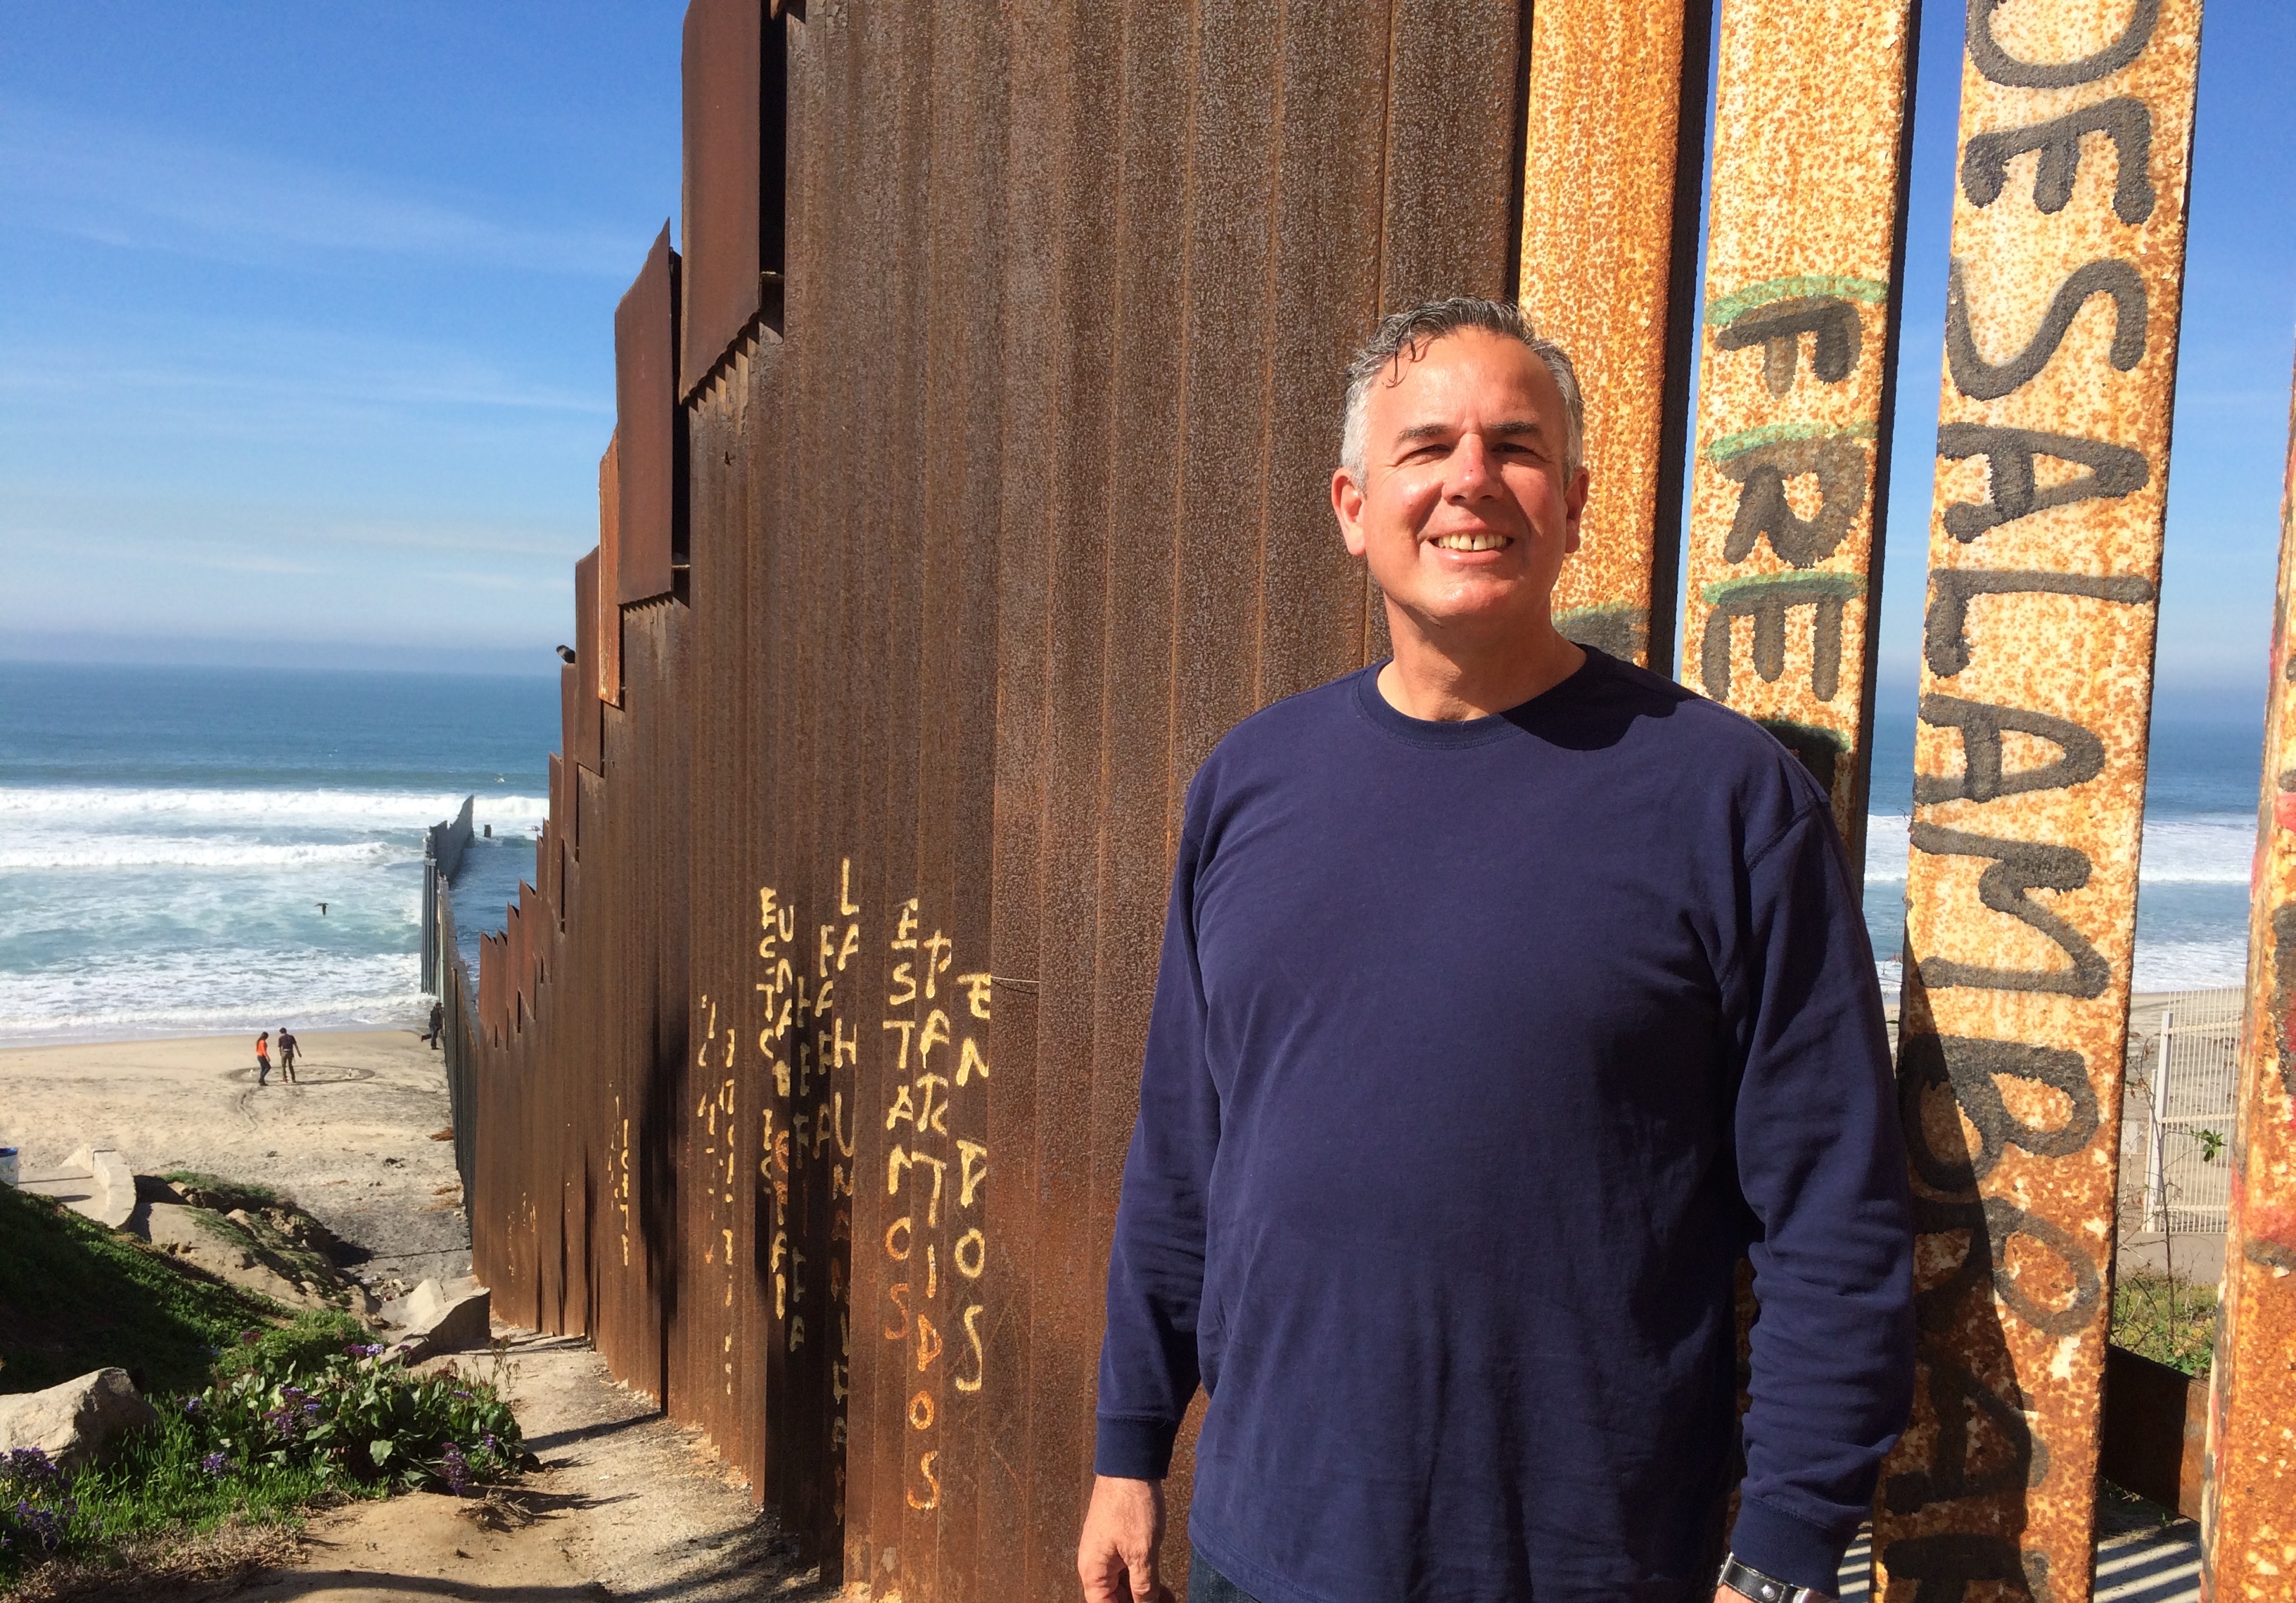 Dave at the U.S. Mexico border - Life on the Border